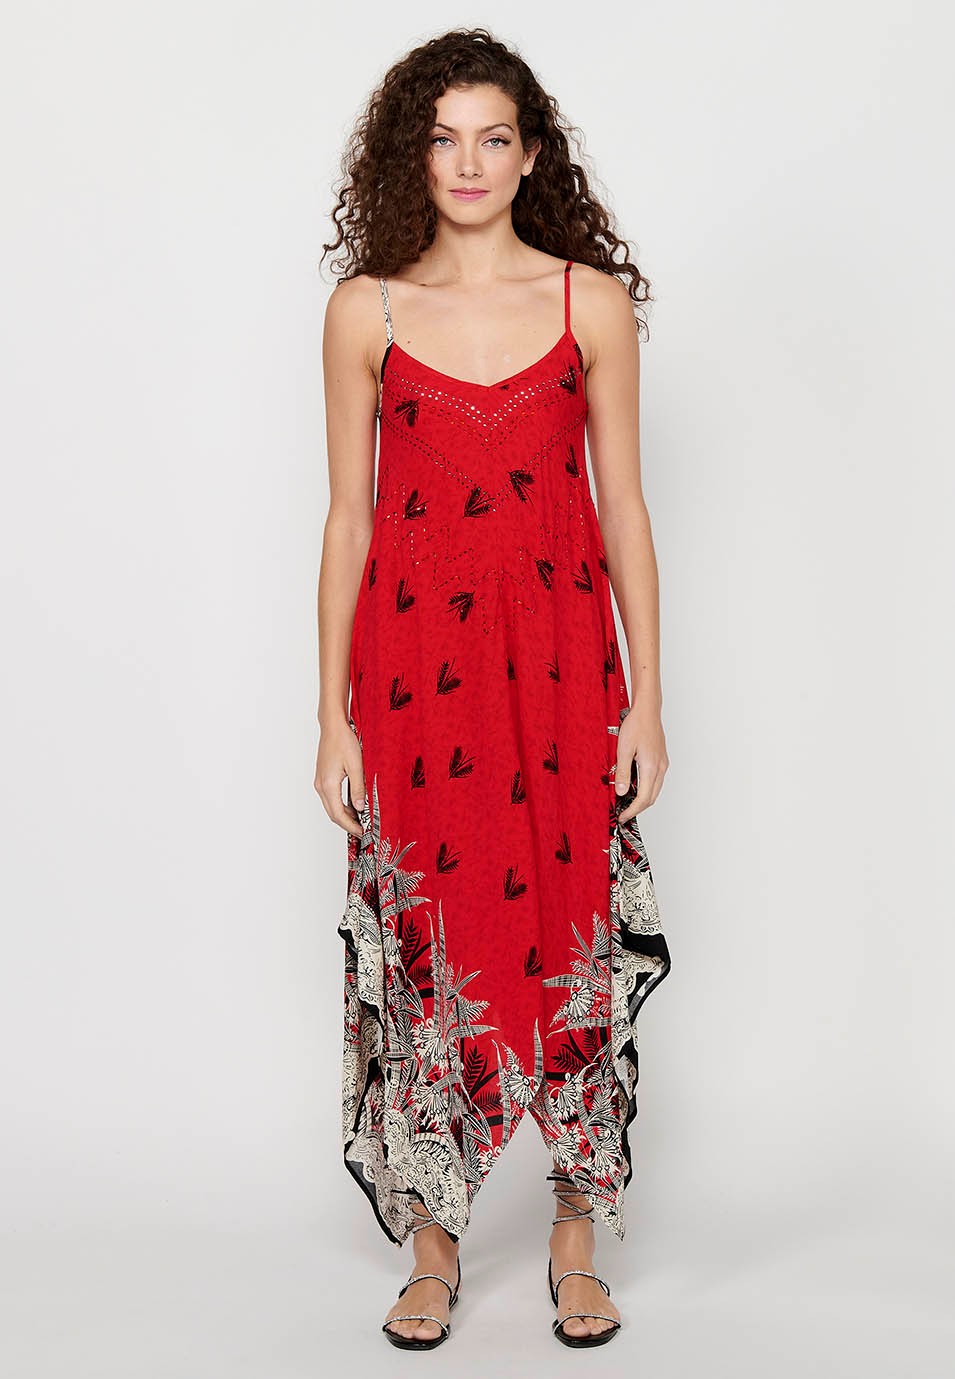 Strap Dress with V-neckline and Red Floral Print for Women 6